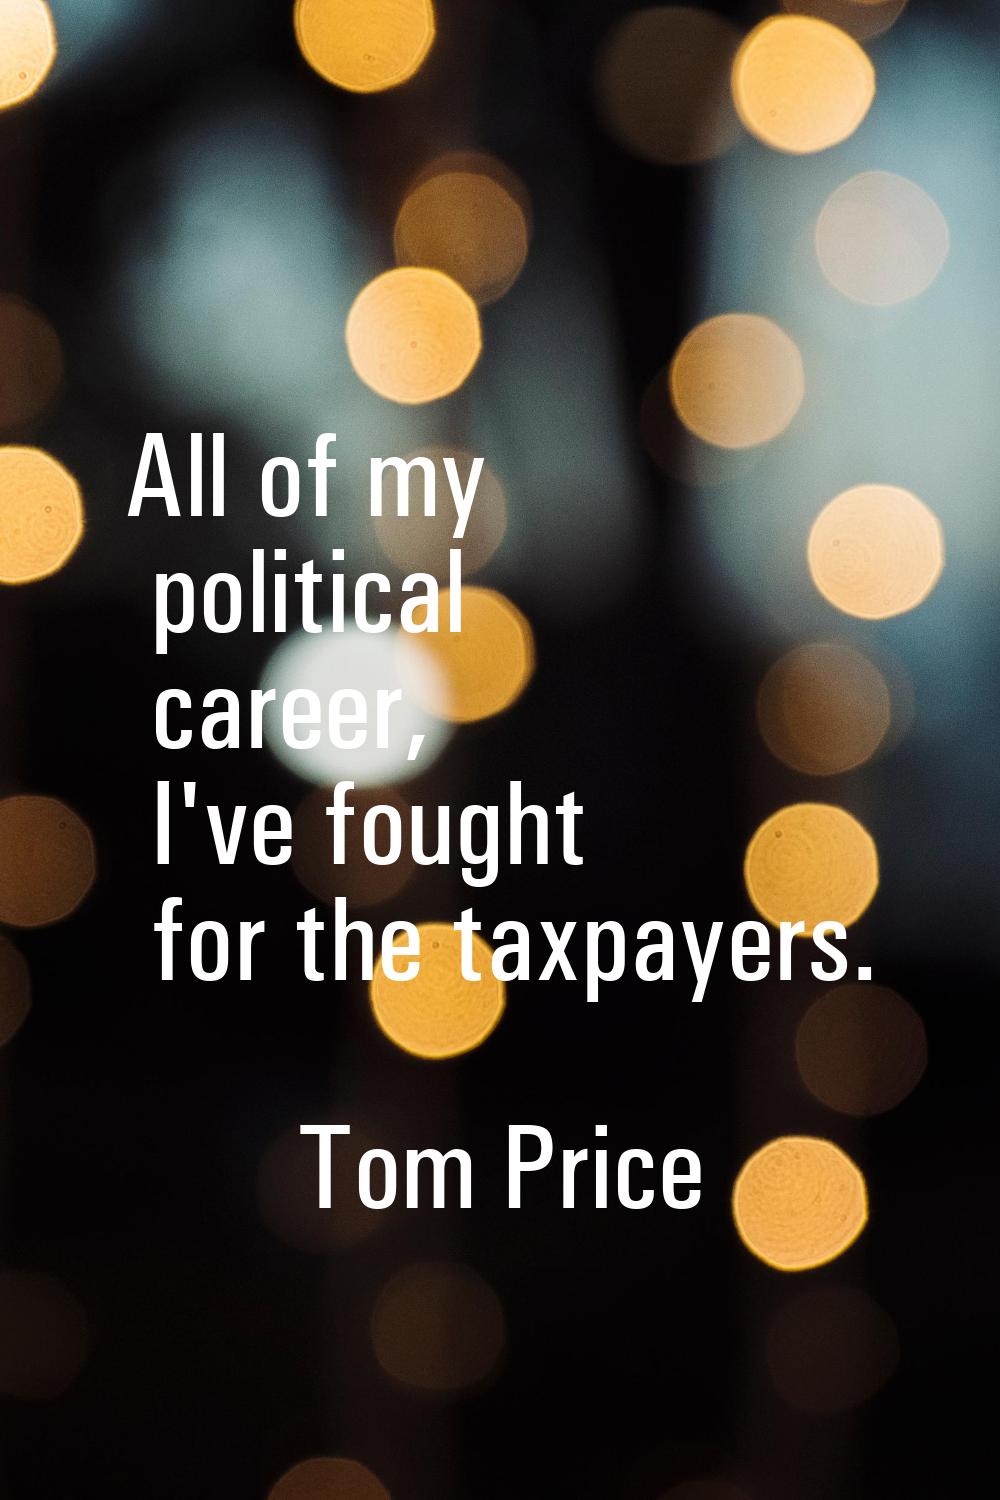 All of my political career, I've fought for the taxpayers.